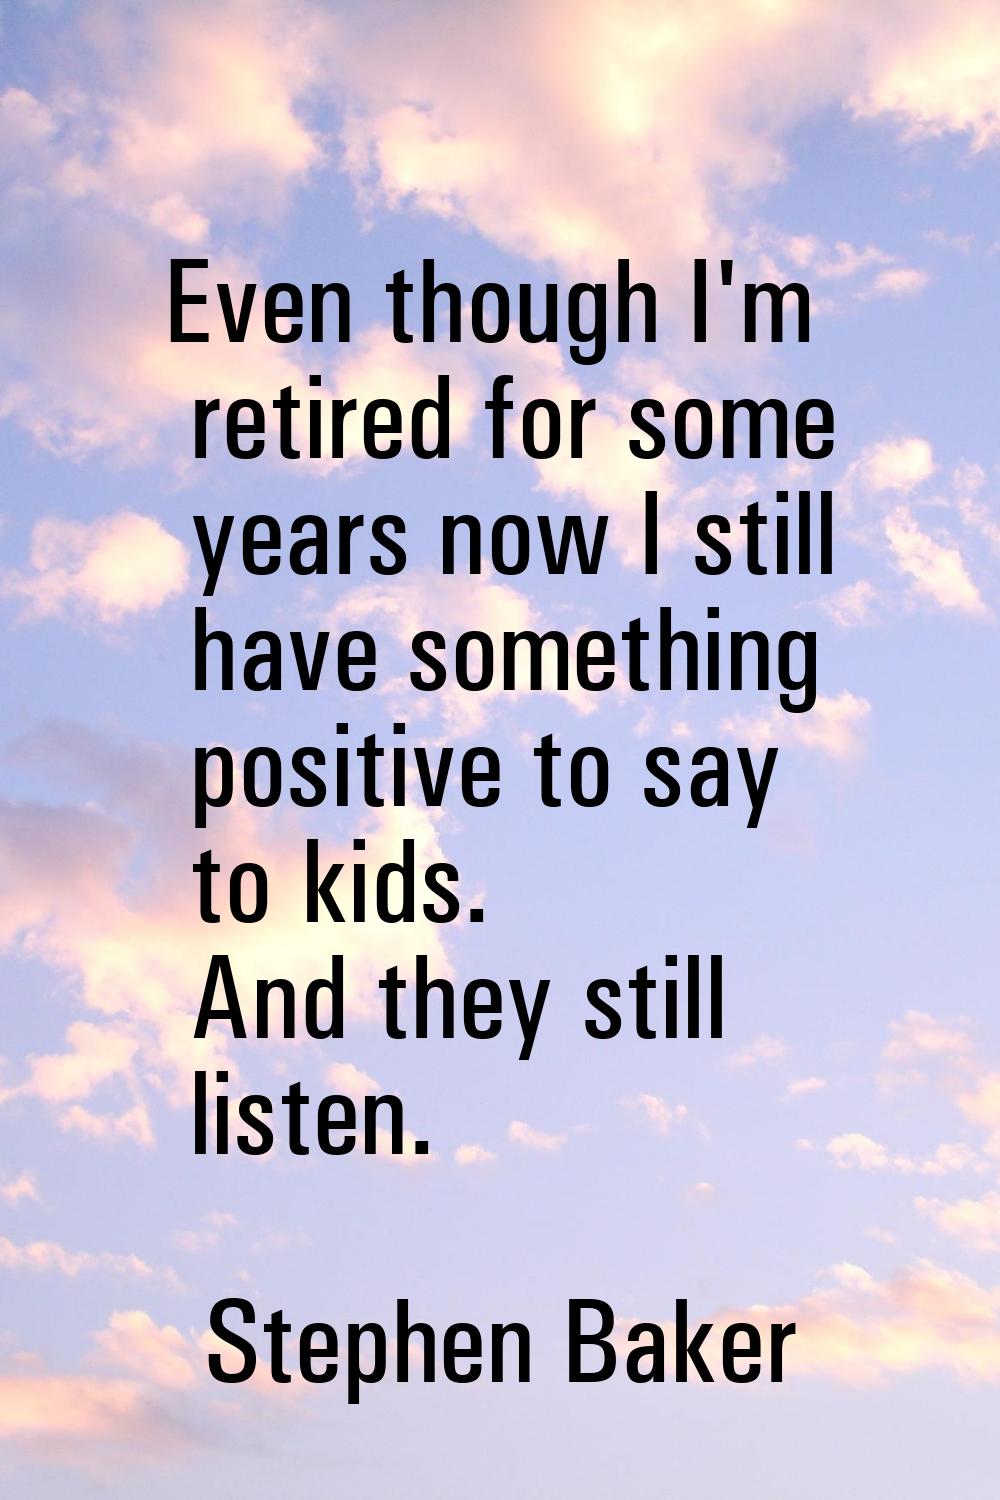 Even though I'm retired for some years now I still have something positive to say to kids. And they